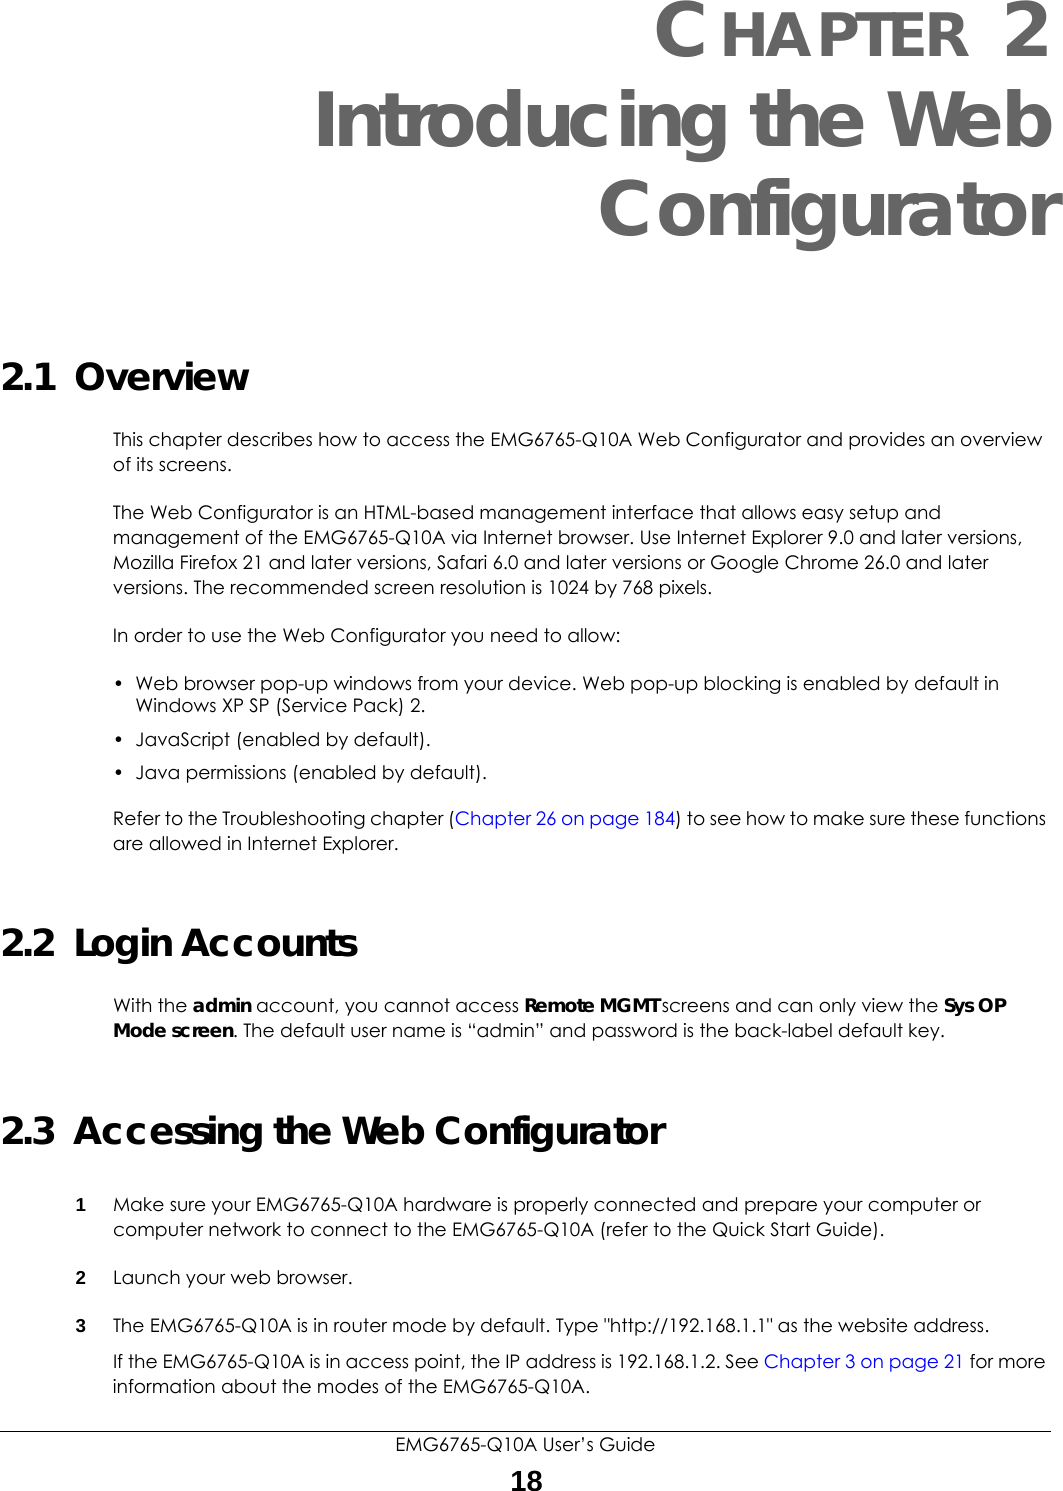 EMG6765-Q10A User’s Guide18CHAPTER 2Introducing the WebConfigurator2.1  OverviewThis chapter describes how to access the EMG6765-Q10A Web Configurator and provides an overview of its screens.The Web Configurator is an HTML-based management interface that allows easy setup and management of the EMG6765-Q10A via Internet browser. Use Internet Explorer 9.0 and later versions, Mozilla Firefox 21 and later versions, Safari 6.0 and later versions or Google Chrome 26.0 and later versions. The recommended screen resolution is 1024 by 768 pixels.In order to use the Web Configurator you need to allow:• Web browser pop-up windows from your device. Web pop-up blocking is enabled by default in Windows XP SP (Service Pack) 2.• JavaScript (enabled by default).• Java permissions (enabled by default).Refer to the Troubleshooting chapter (Chapter 26 on page 184) to see how to make sure these functions are allowed in Internet Explorer.2.2  Login AccountsWith the admin account, you cannot access Remote MGMT screens and can only view the Sys OP Mode screen. The default user name is “admin” and password is the back-label default key.2.3  Accessing the Web Configurator1Make sure your EMG6765-Q10A hardware is properly connected and prepare your computer or computer network to connect to the EMG6765-Q10A (refer to the Quick Start Guide).2Launch your web browser.3The EMG6765-Q10A is in router mode by default. Type &quot;http://192.168.1.1&quot; as the website address.If the EMG6765-Q10A is in access point, the IP address is 192.168.1.2. See Chapter 3 on page 21 for more information about the modes of the EMG6765-Q10A.